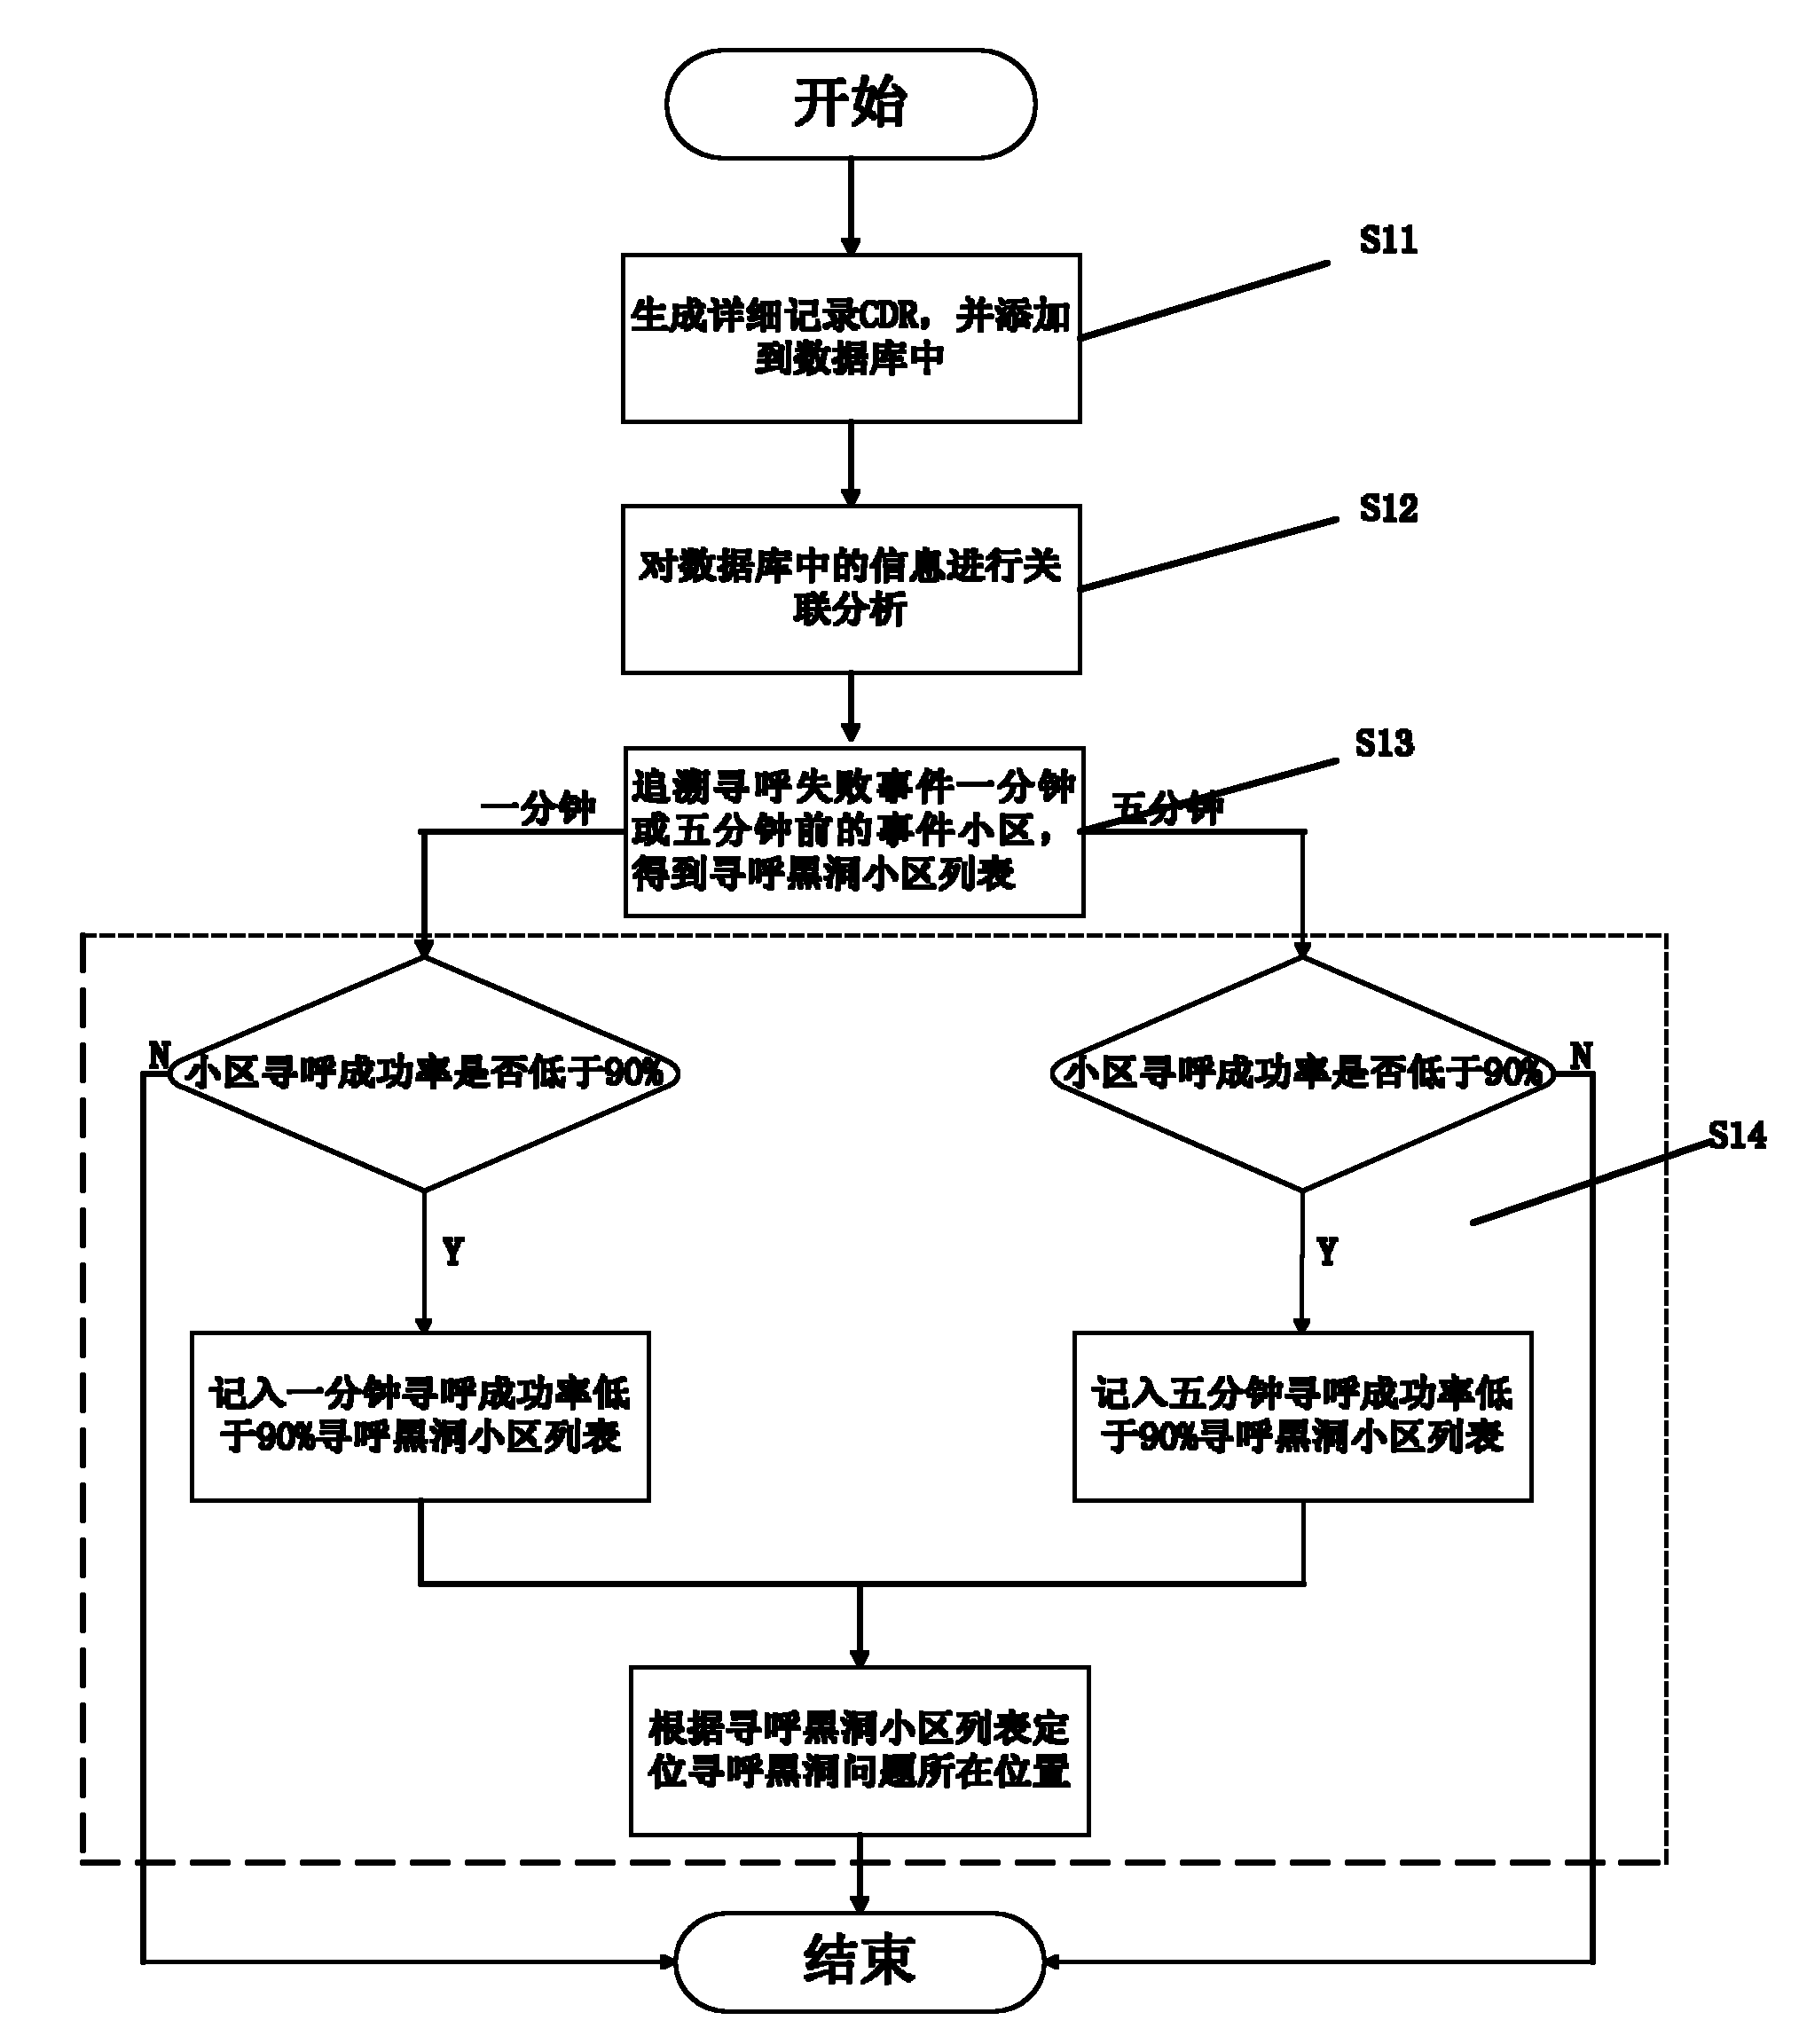 Paging black hole cell locating method based on signaling of interface A